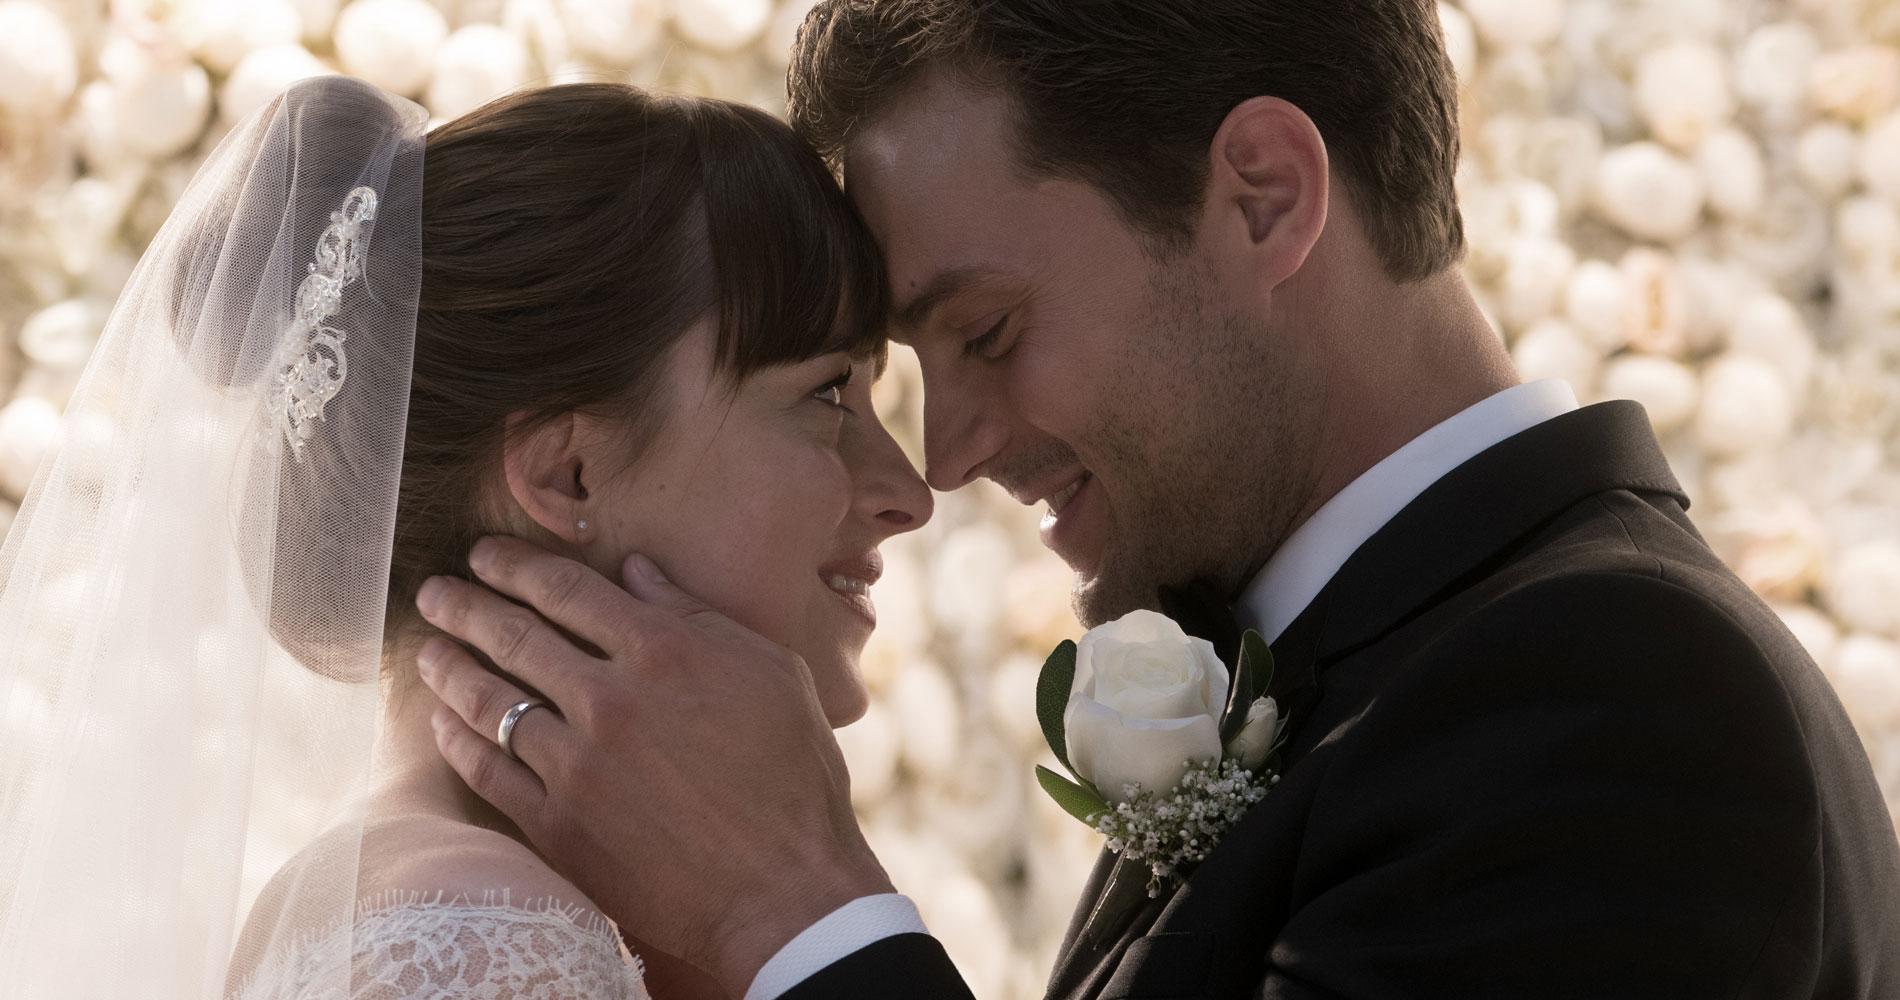 ”Fifty Shades Freed” a provocat un scandal uriaș. Cine are dreptate?